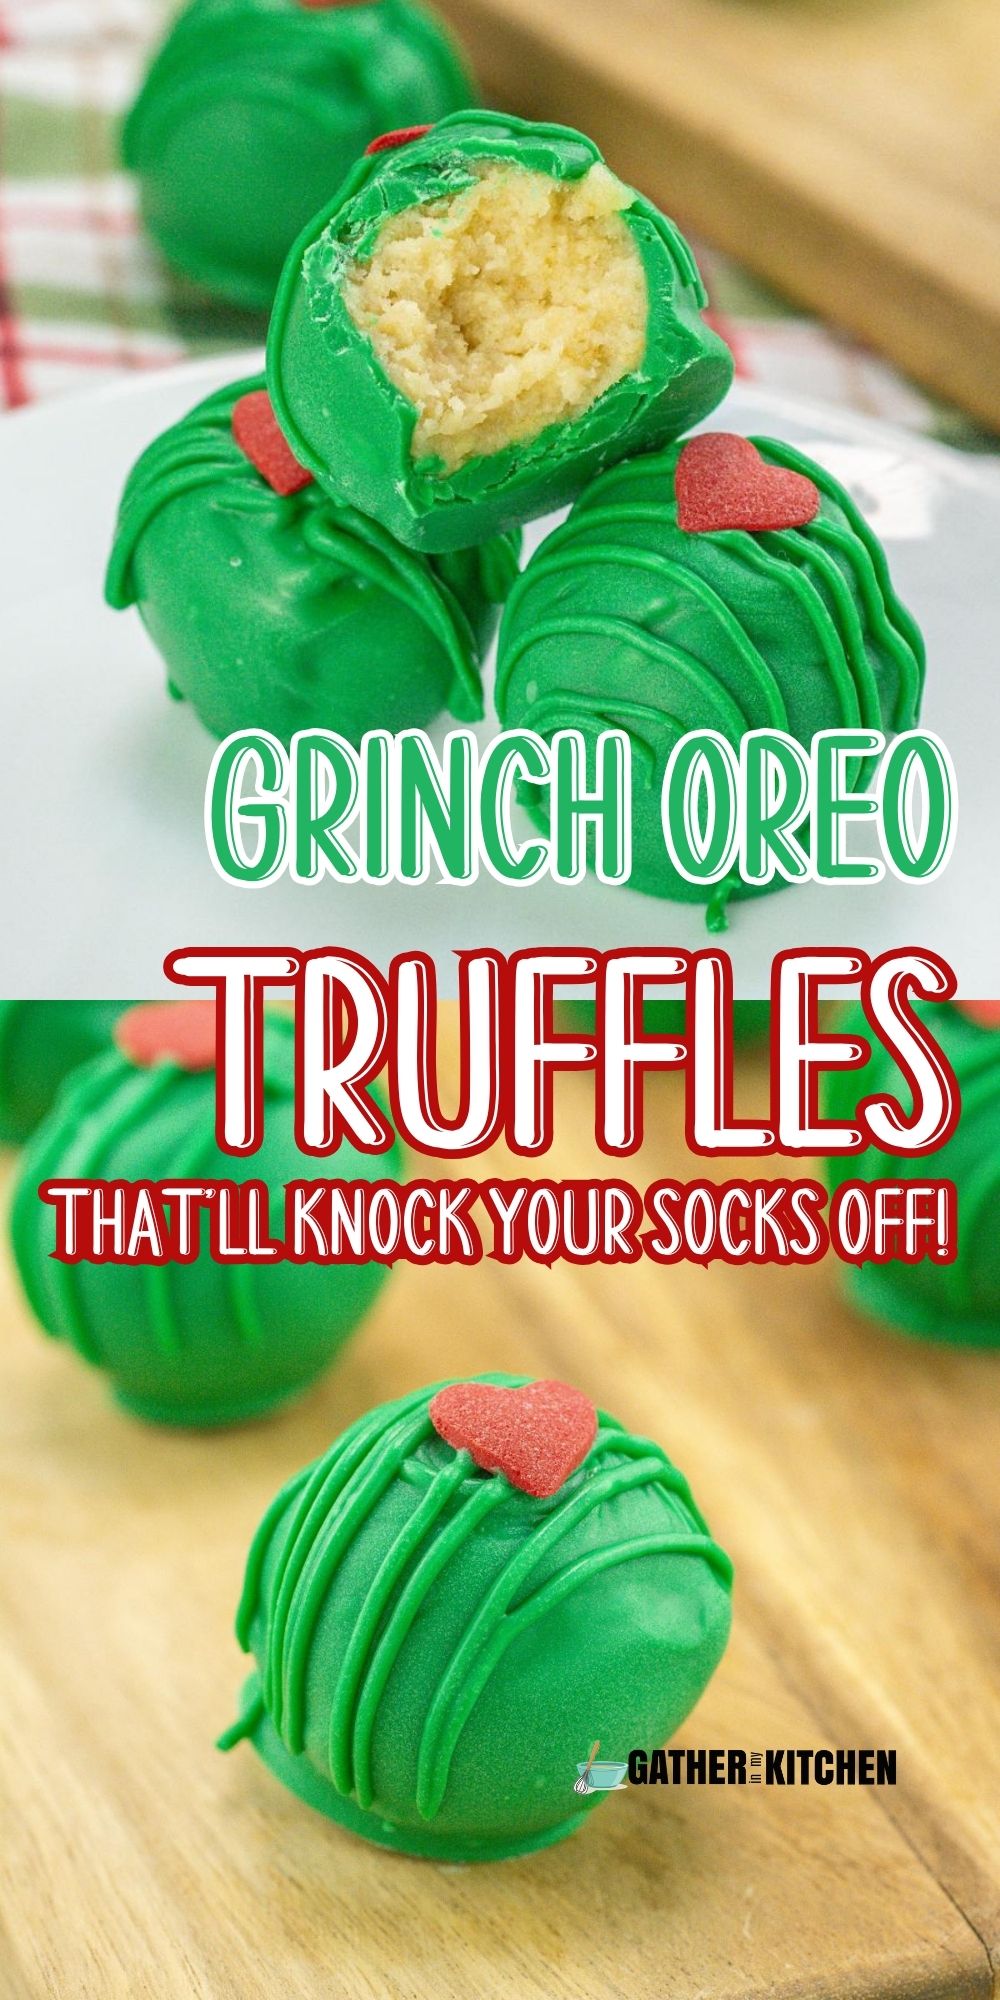 Pin image: top is a pile of oreo truffles, middle says "Grinch Oreo Truffles That'll Knock Your Socks Off" and bottom is a closeup of a Grinch Oreo Truffle